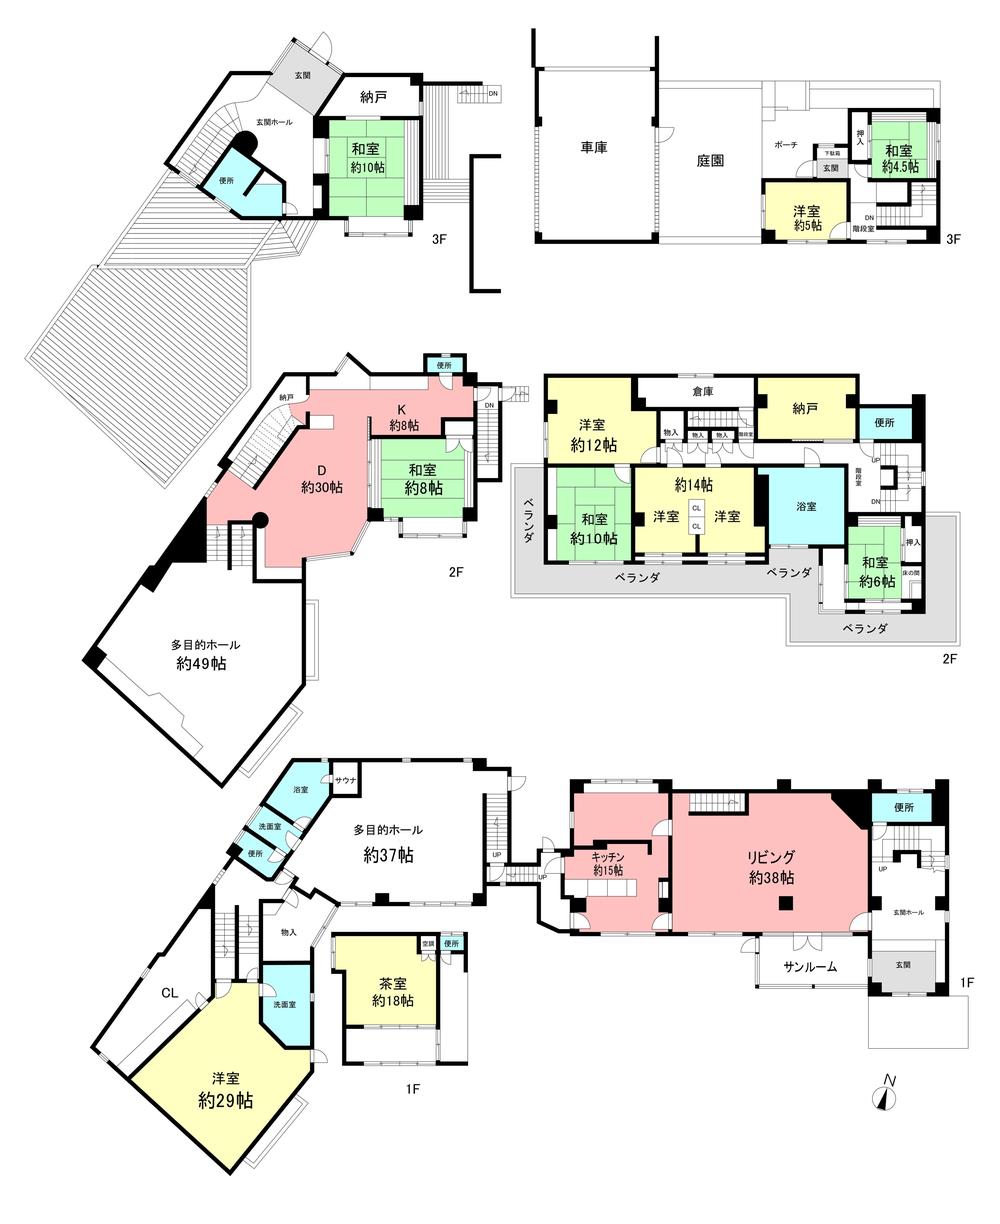 Floor plan. 98 million yen, 6LDK + 2S (storeroom), Land area 1,005 sq m , Building area 351.46 sq m   ※ East side building, 1973 May building in the building, It takes a considerable repair. West building, Unregistered reinforced concrete three-story (total floor area: about 456.30 sq m) there.